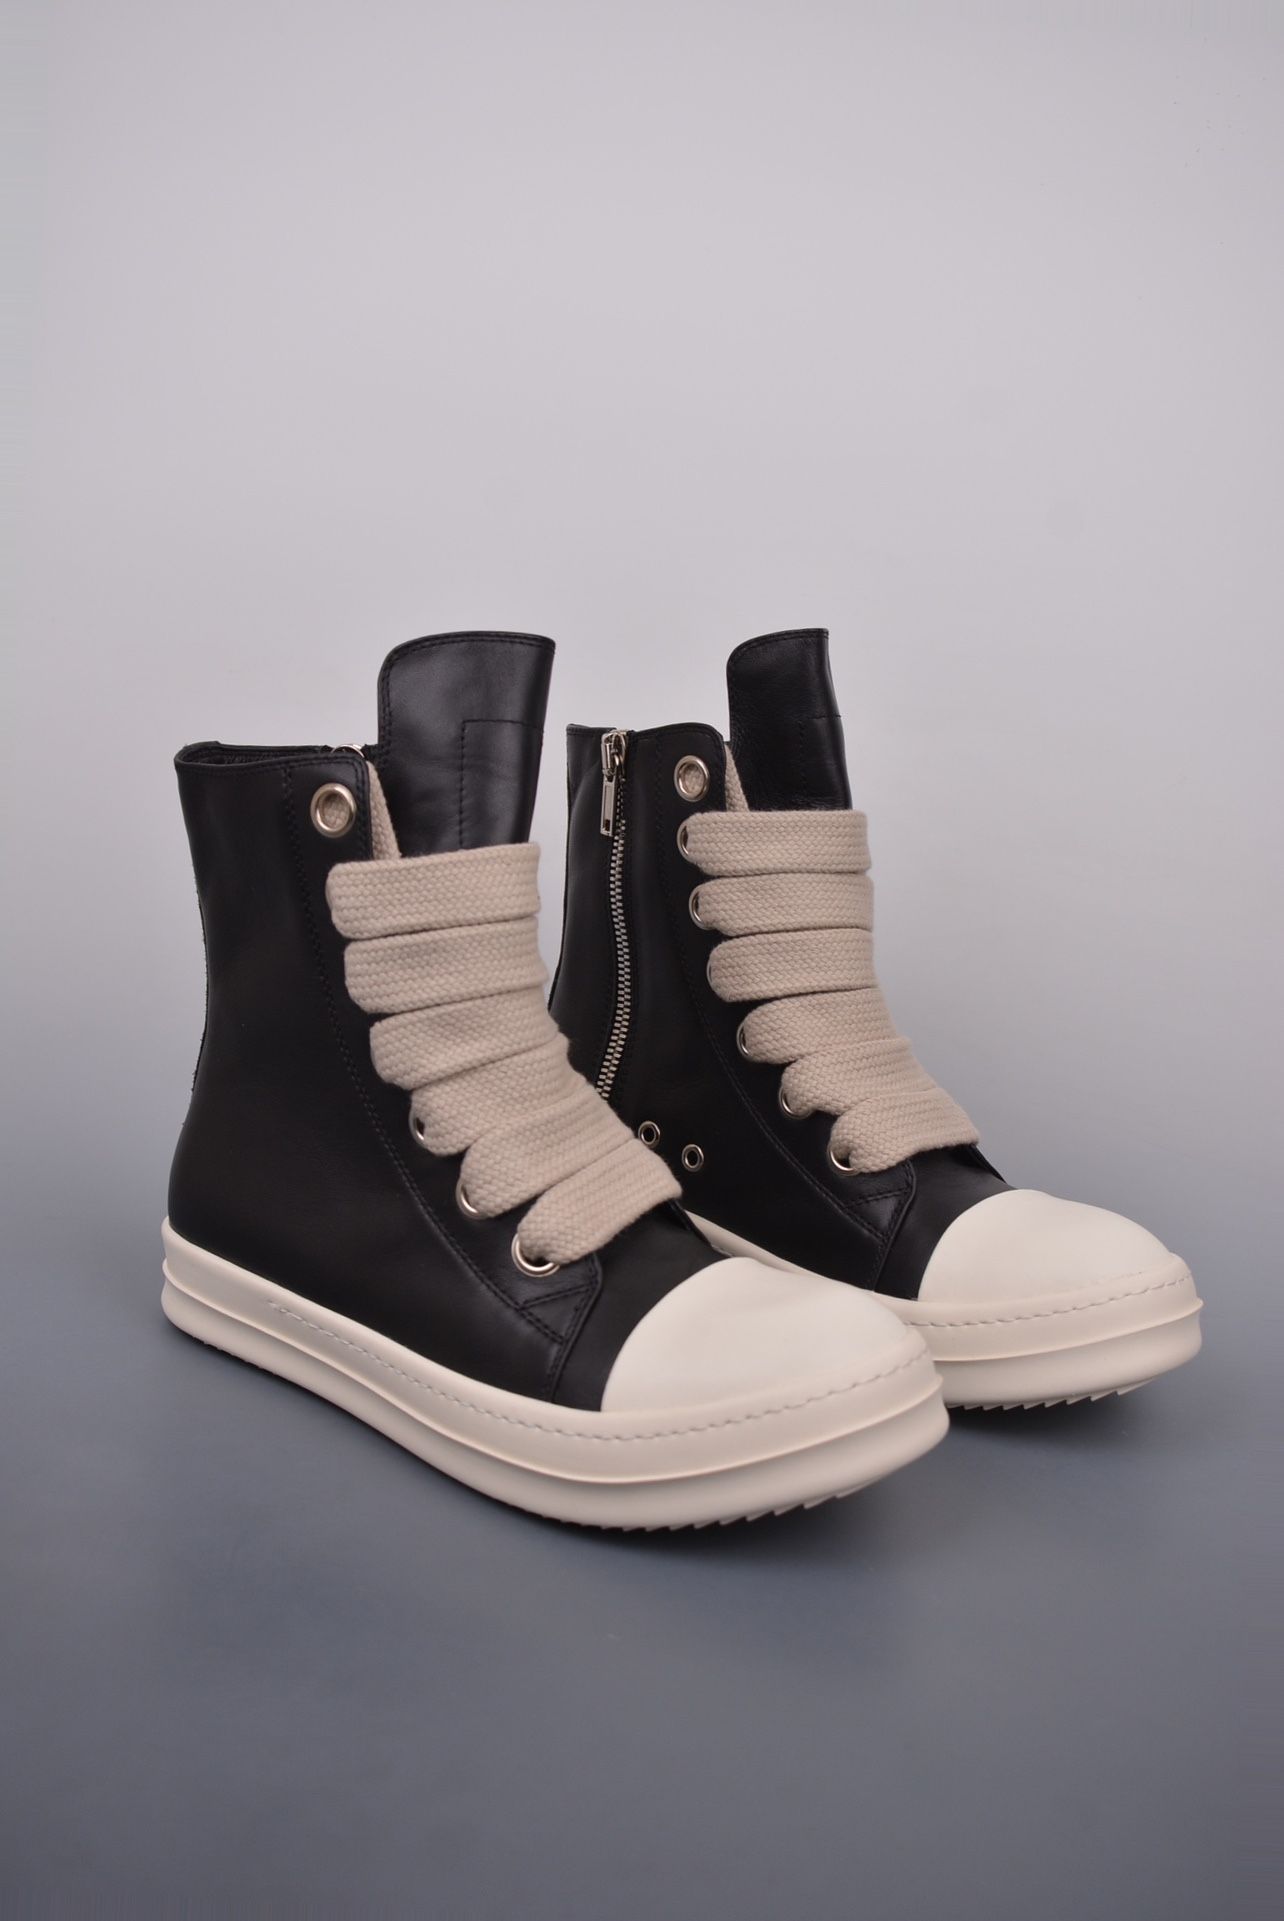 Rick Owens Leather Low Sneakers 24 